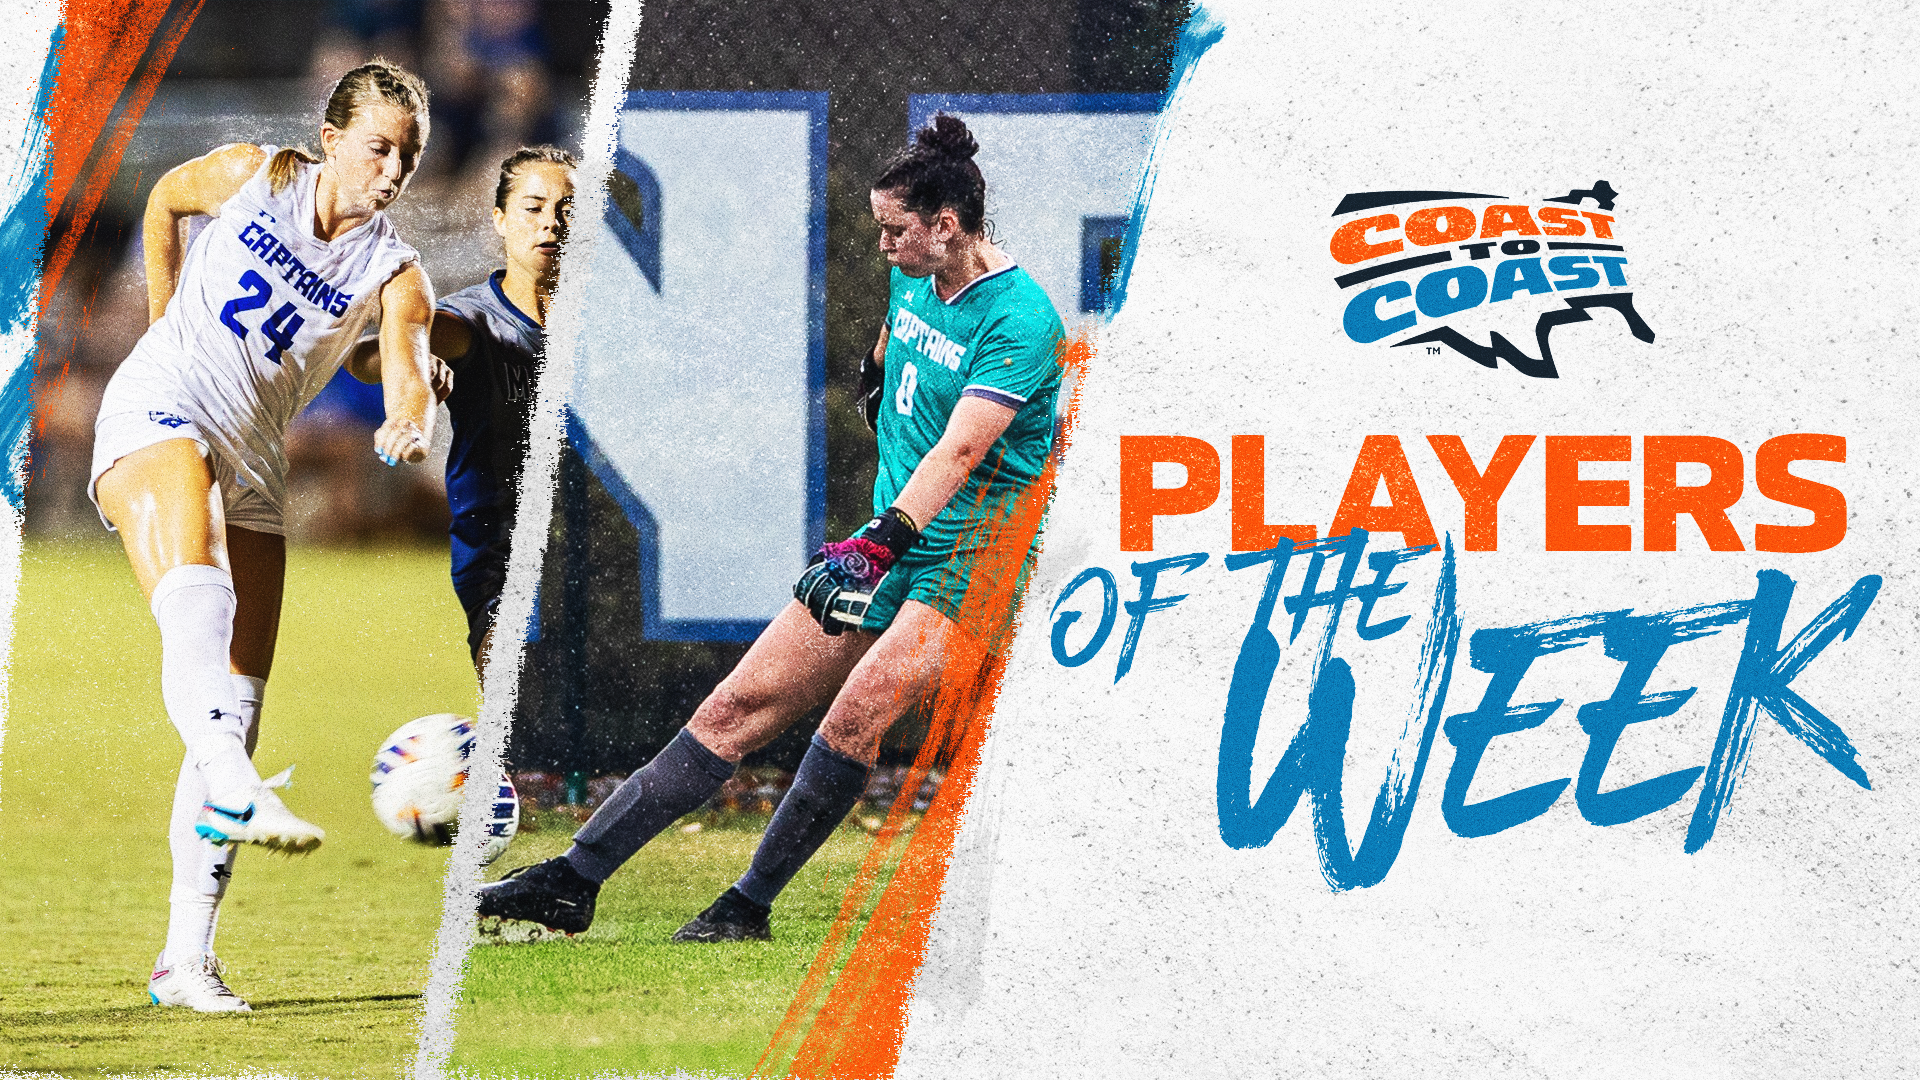 Christopher Newport’s Gough, Sidaway Capture C2C Women's Soccer Player of the Week Honors